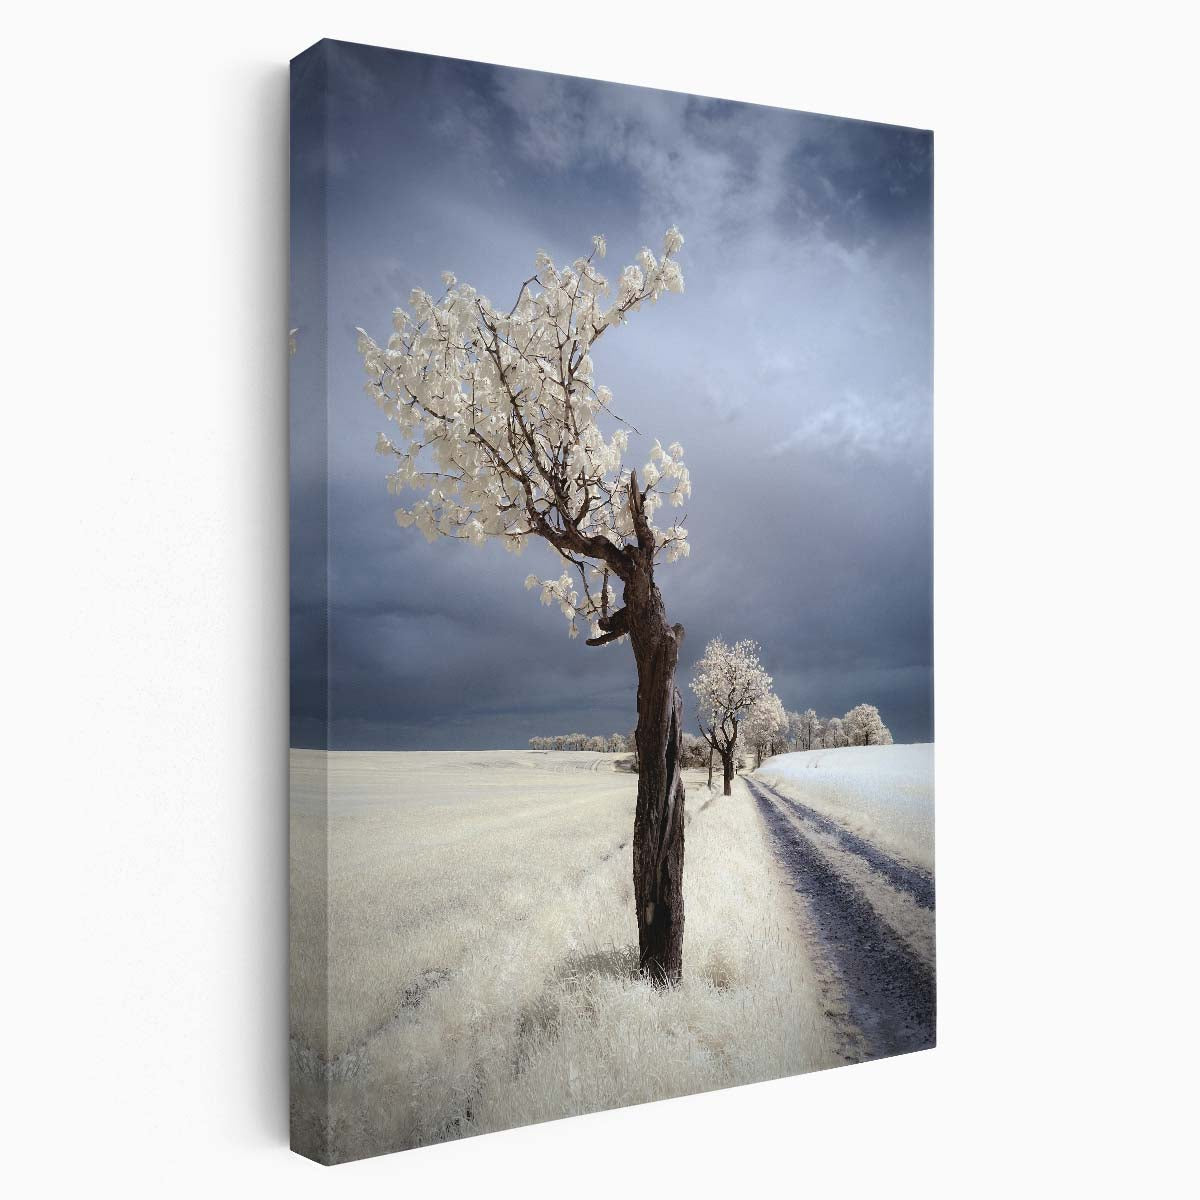 Infrared Photography White Tree Road Landscape, Lower Silesia Poland by Luxuriance Designs, made in USA